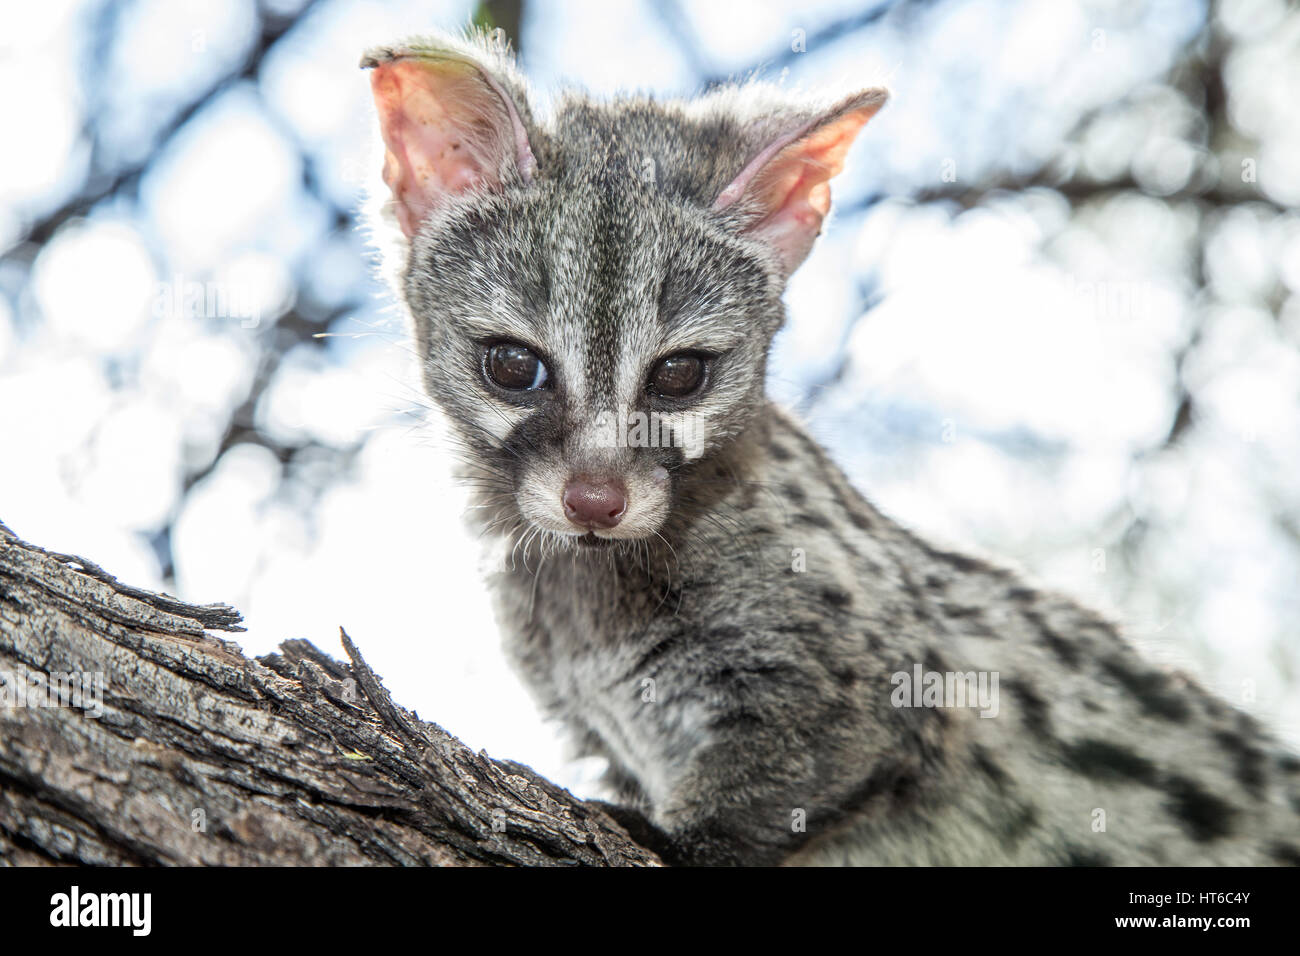 Young Small Spotted Genet on Branch Stock Photo